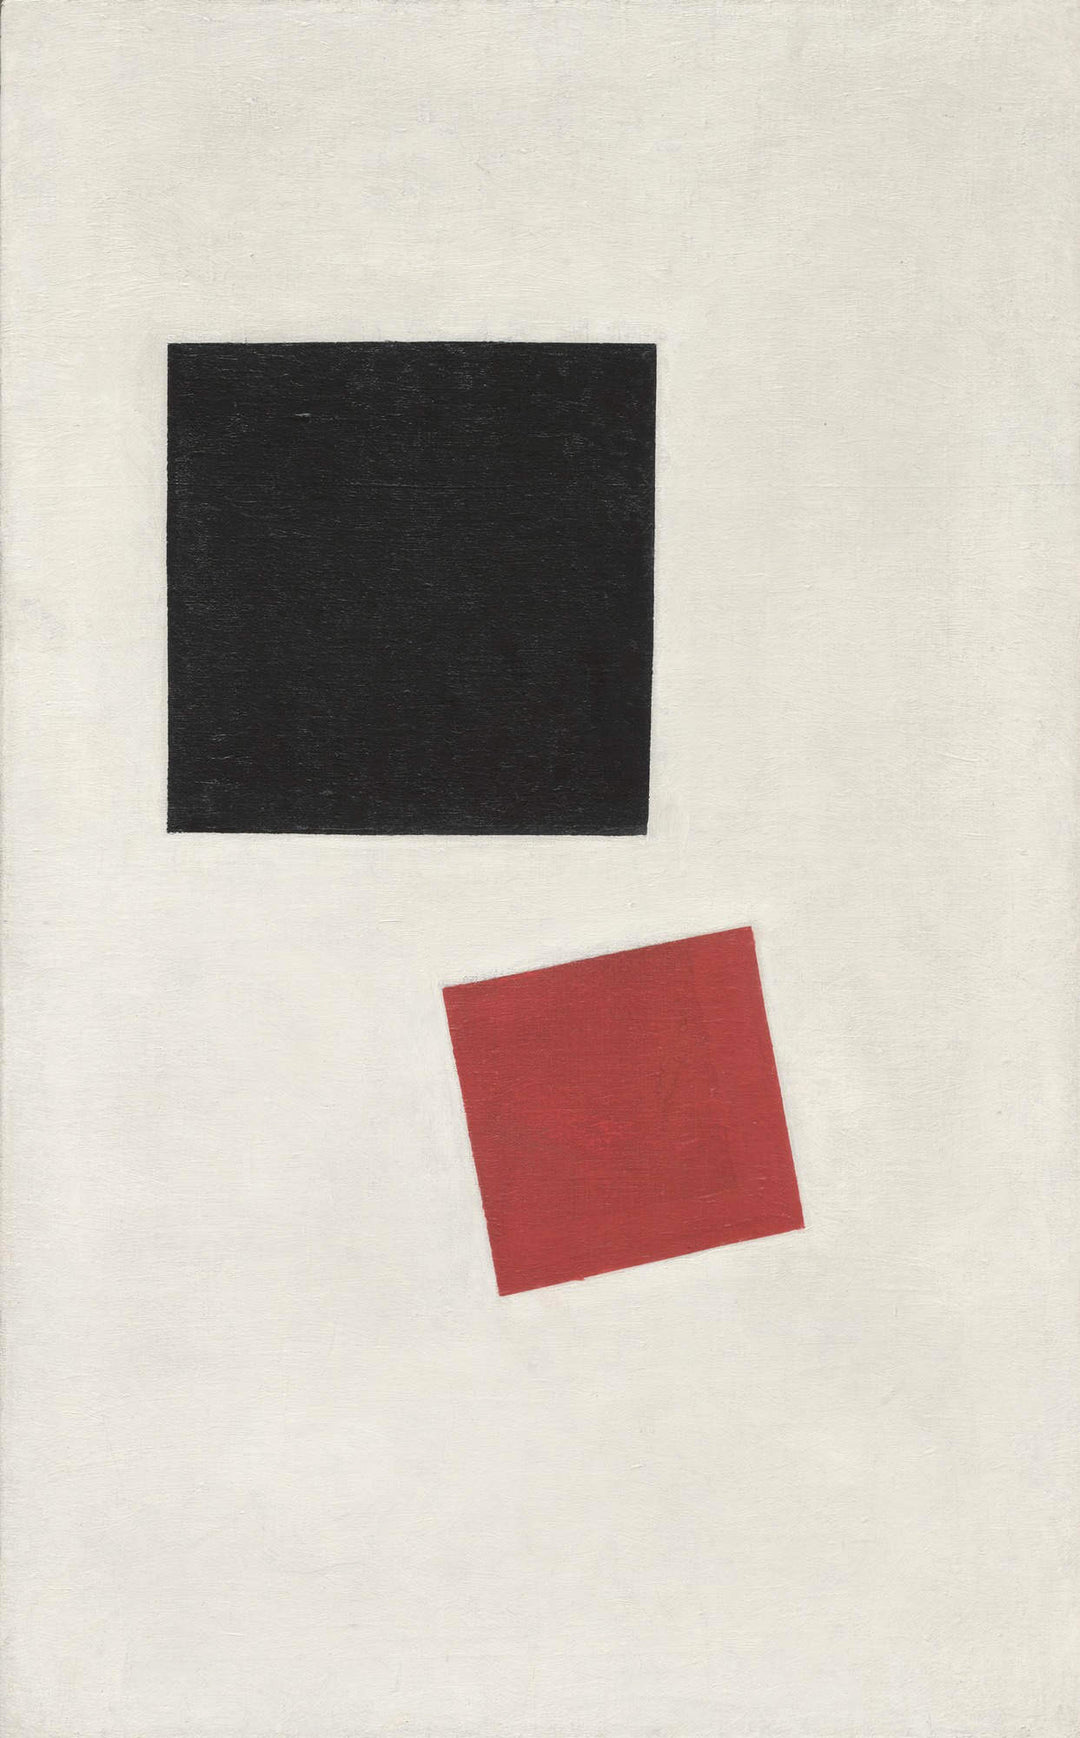 Black Square and Red Square Painting by Kazimir Malevich